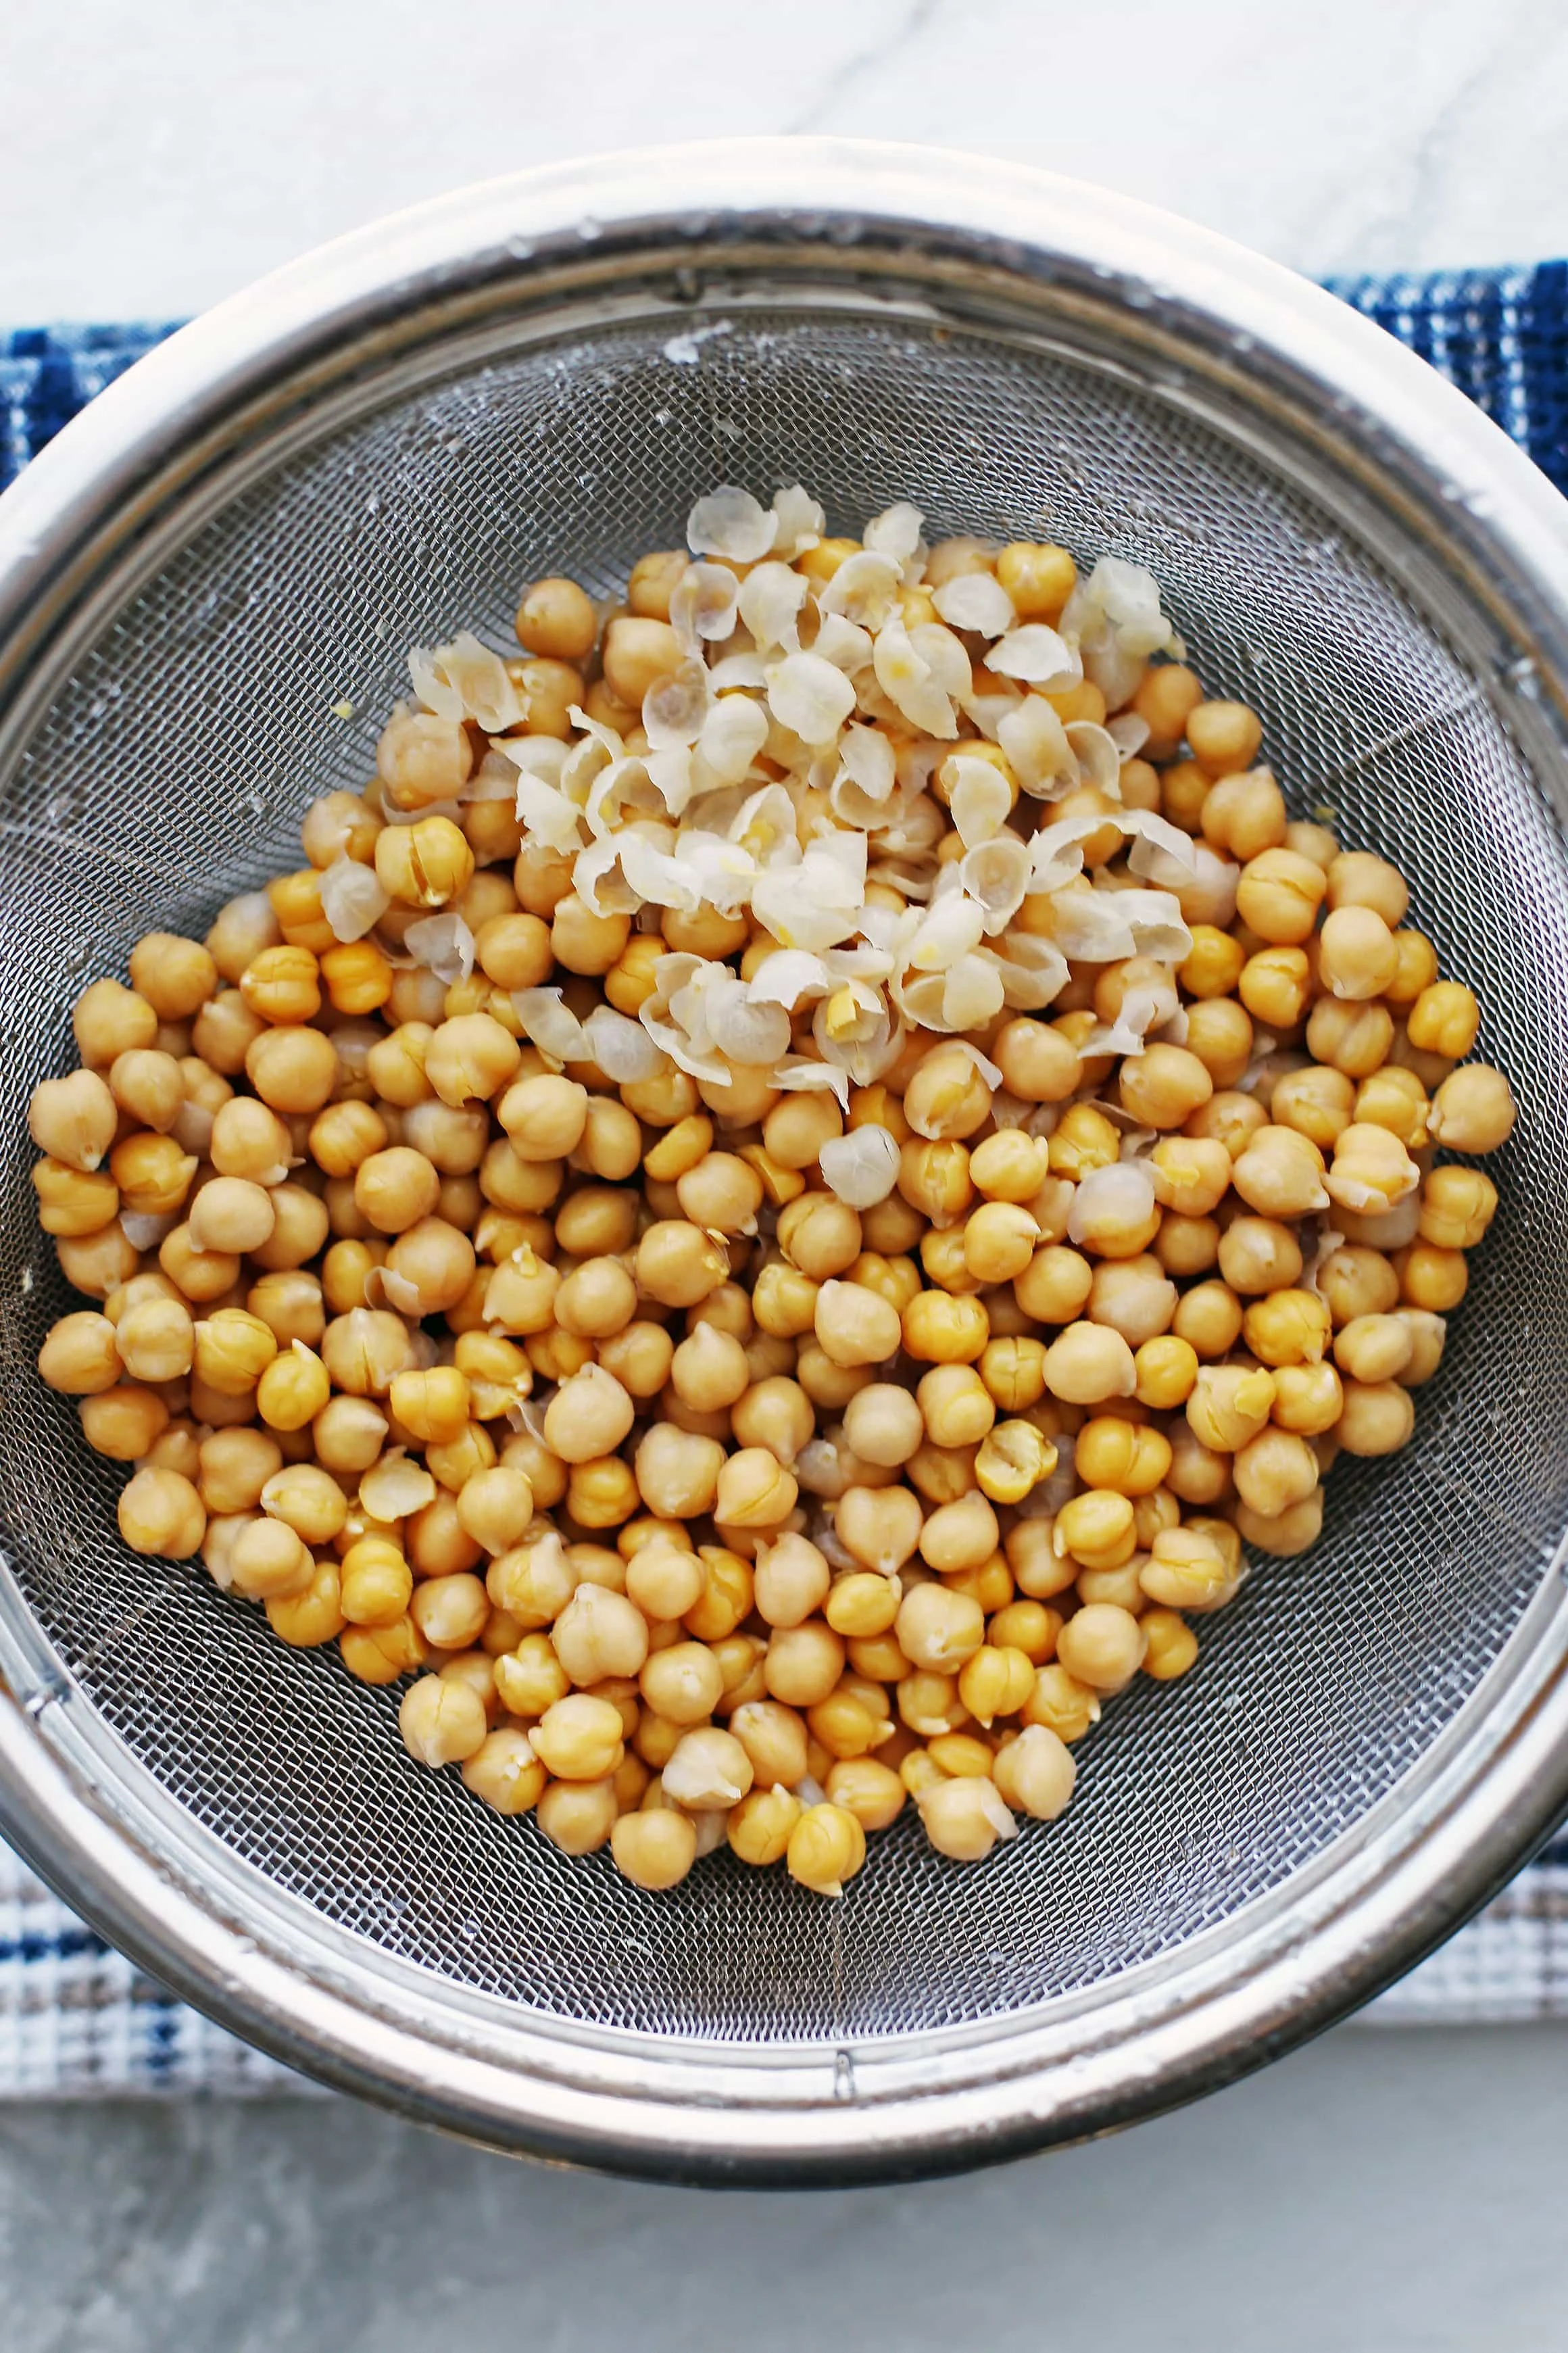 Rinsed and drained cooked chickpeas in a wire strainer.